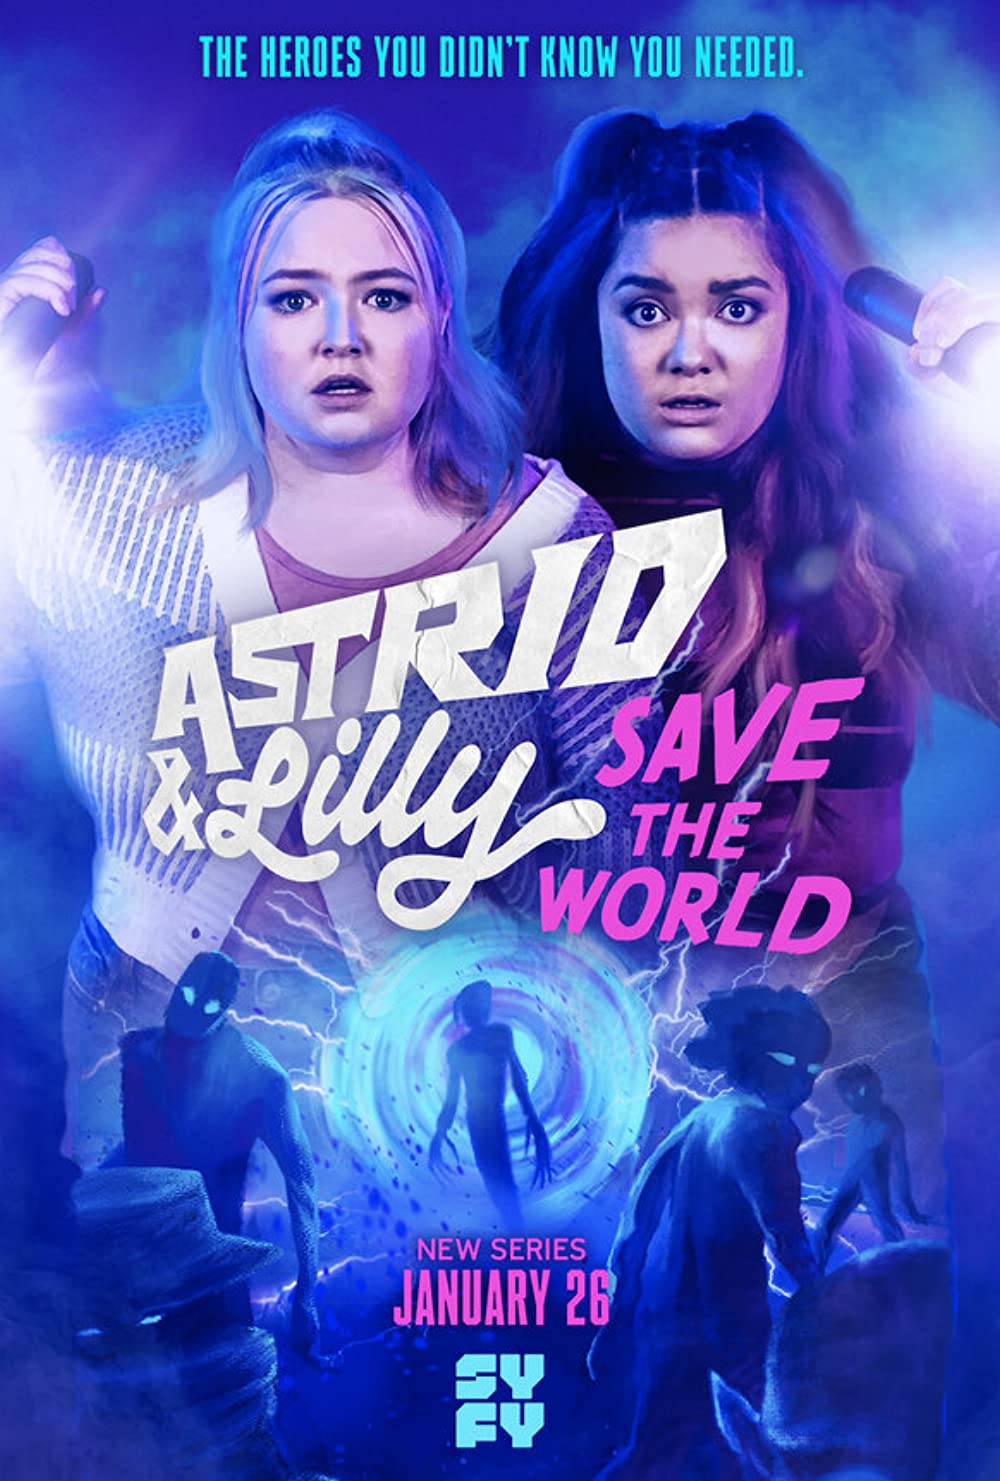 Where to watch Astrid and Lilly Save the World season 1